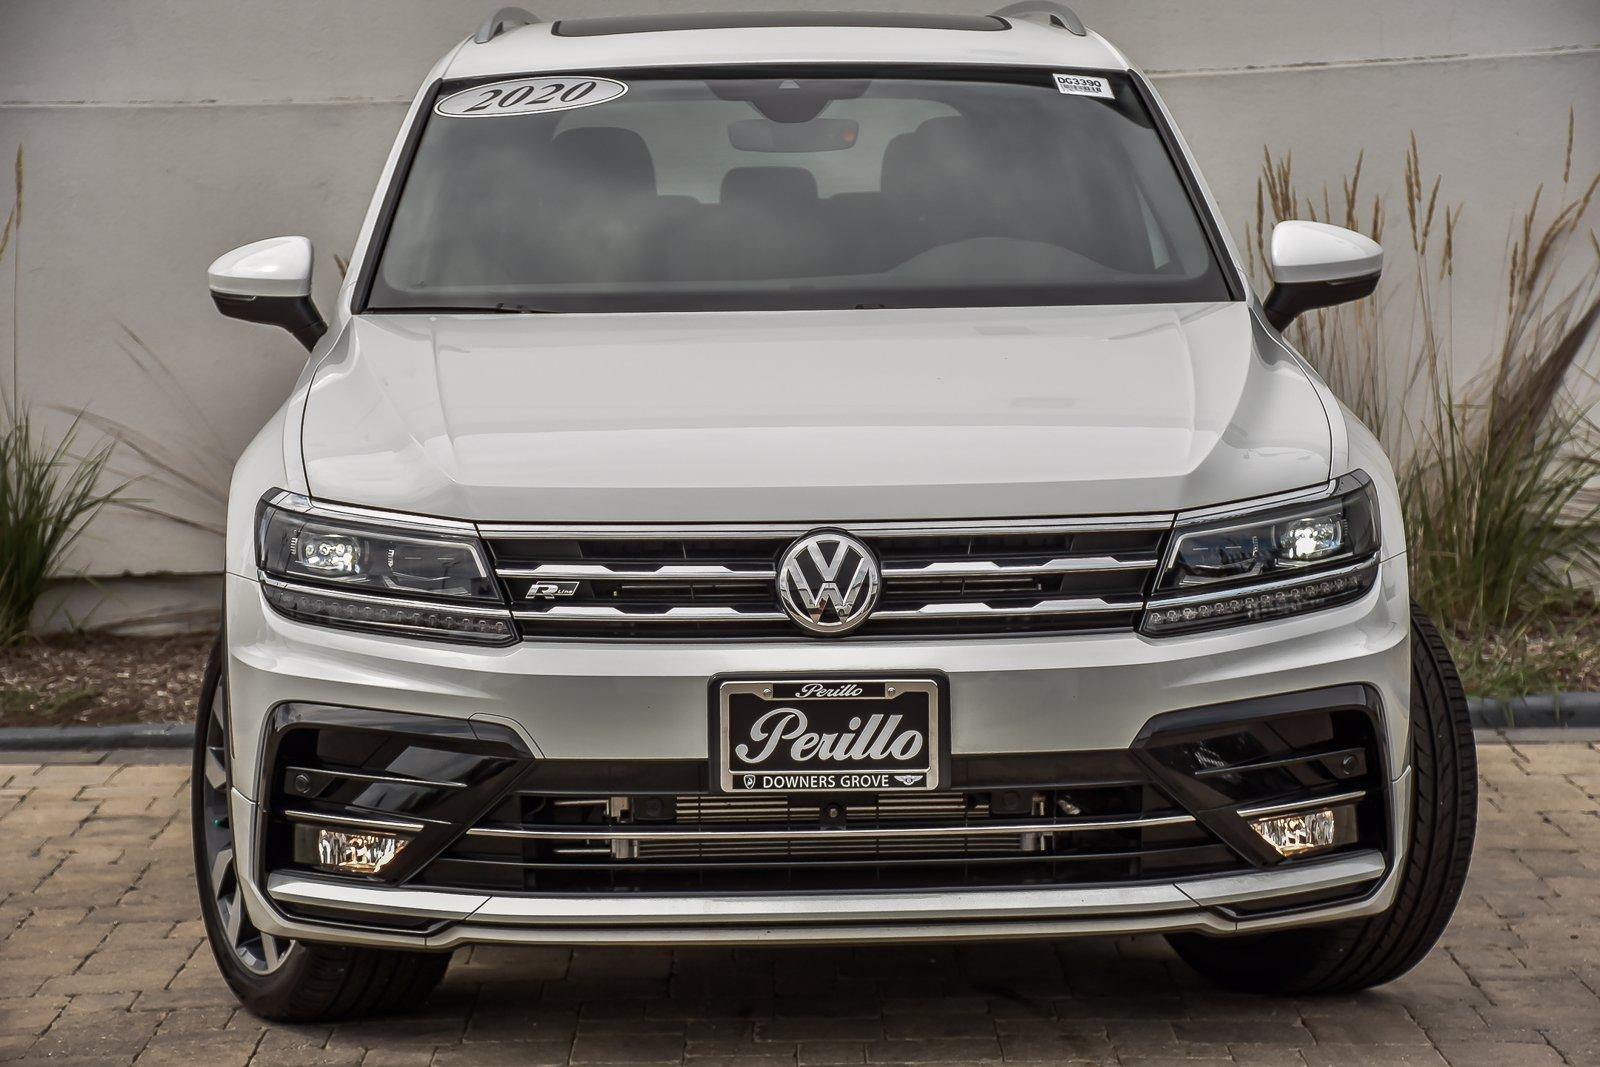 Used 2020 Volkswagen Tiguan SEL Premium R-Line, 3rd Row, | Downers Grove, IL